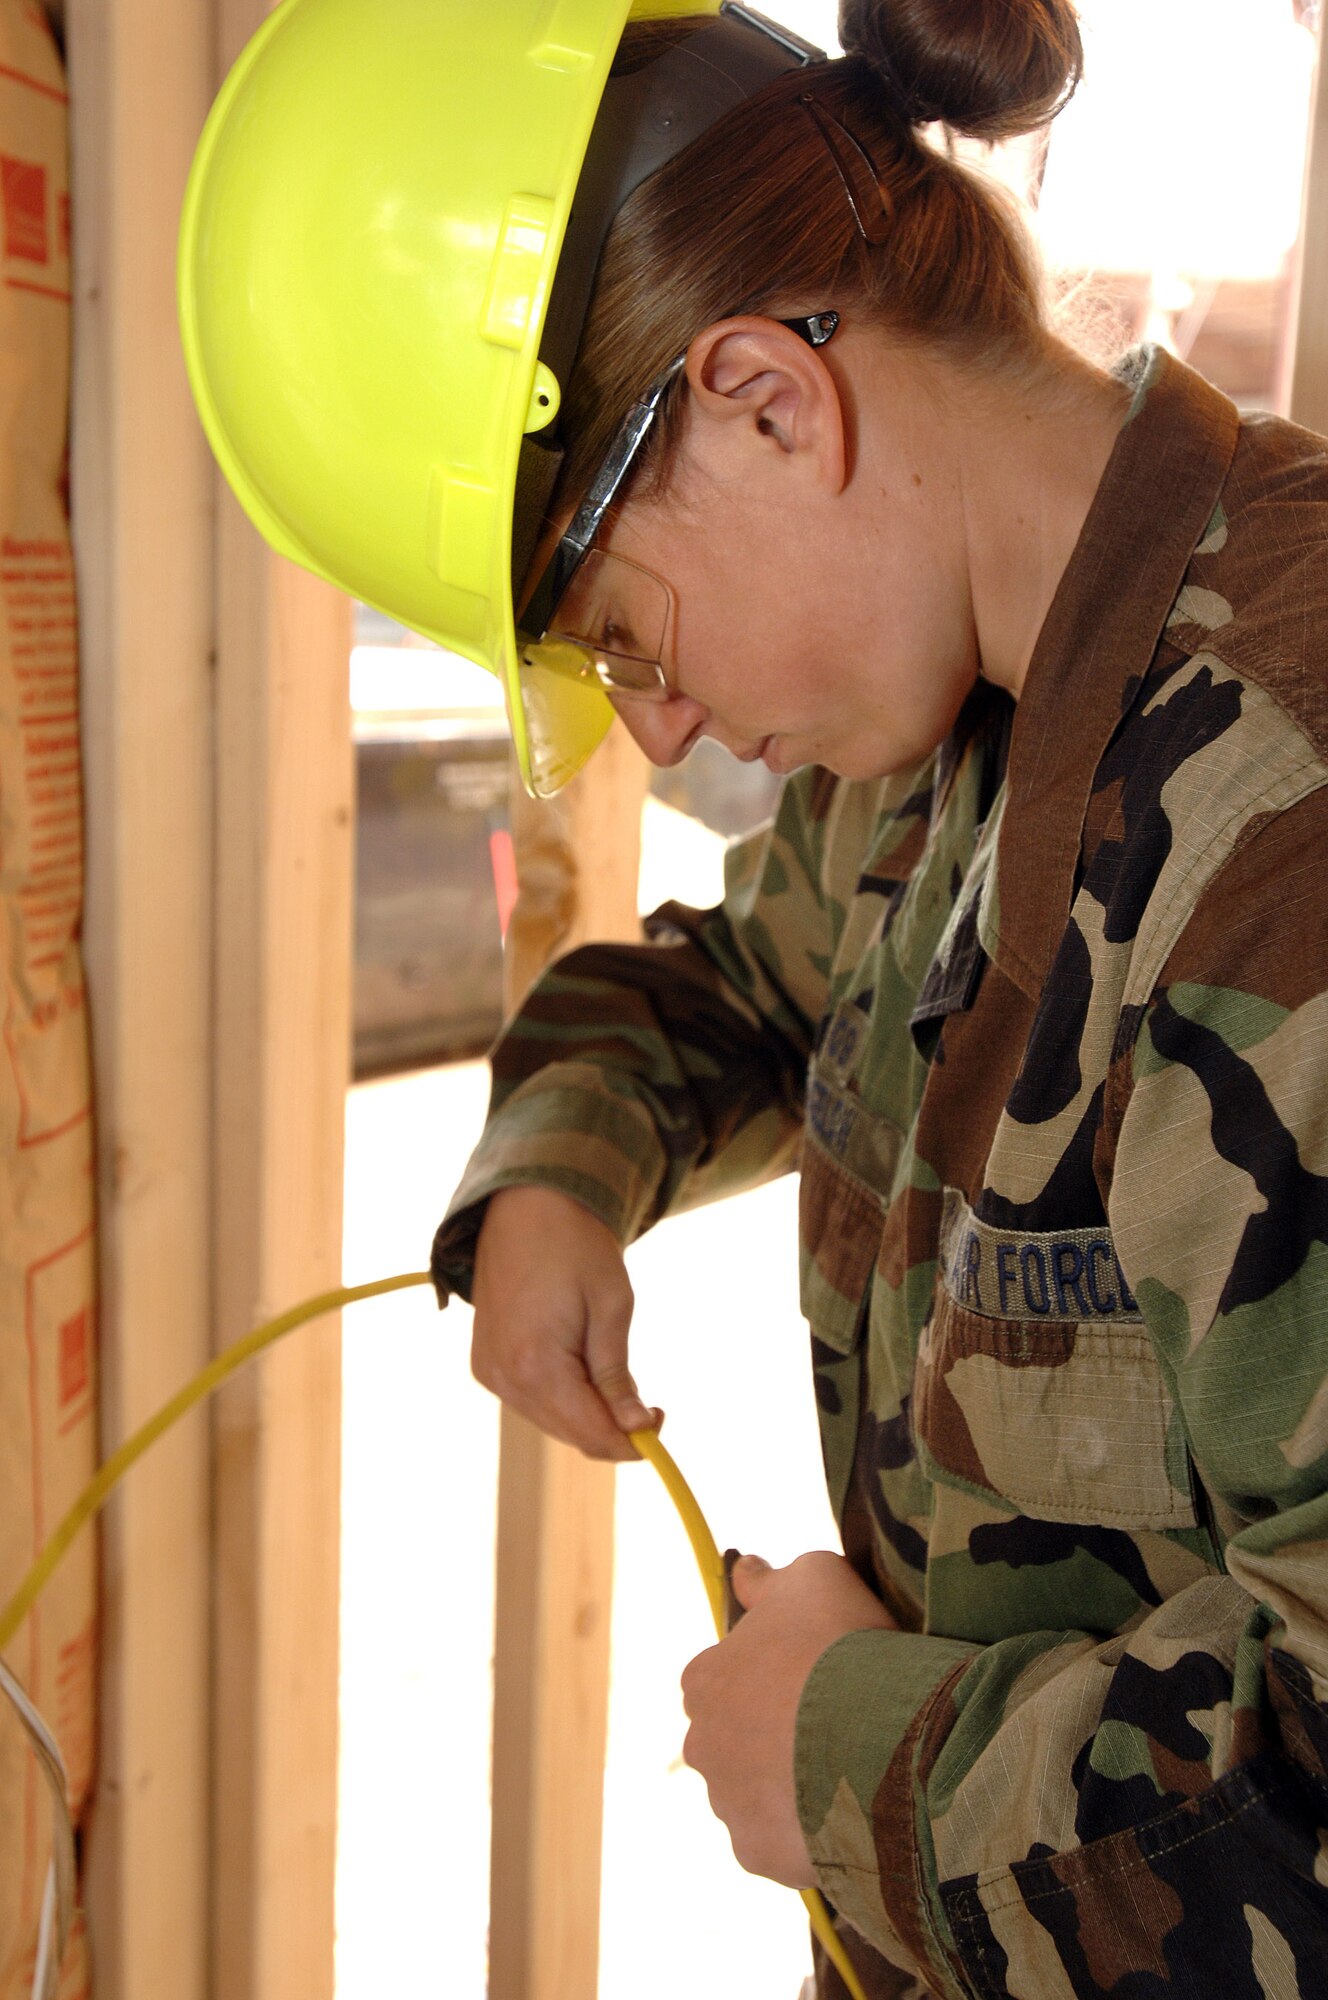 Air Force Academy Cadet 2nd Class Holly Bigalow installs wiring in a house being built by cadets during the Field Engineering and Readiness Laboratory course at the Academy.  The course exposes cadets to several aspects of civil engineering, including heavy equipment operation, steel bridge construction, designing and pouring concrete beams and paving portions of a road. (U.S. Air Force photo/Mike Kaplan)